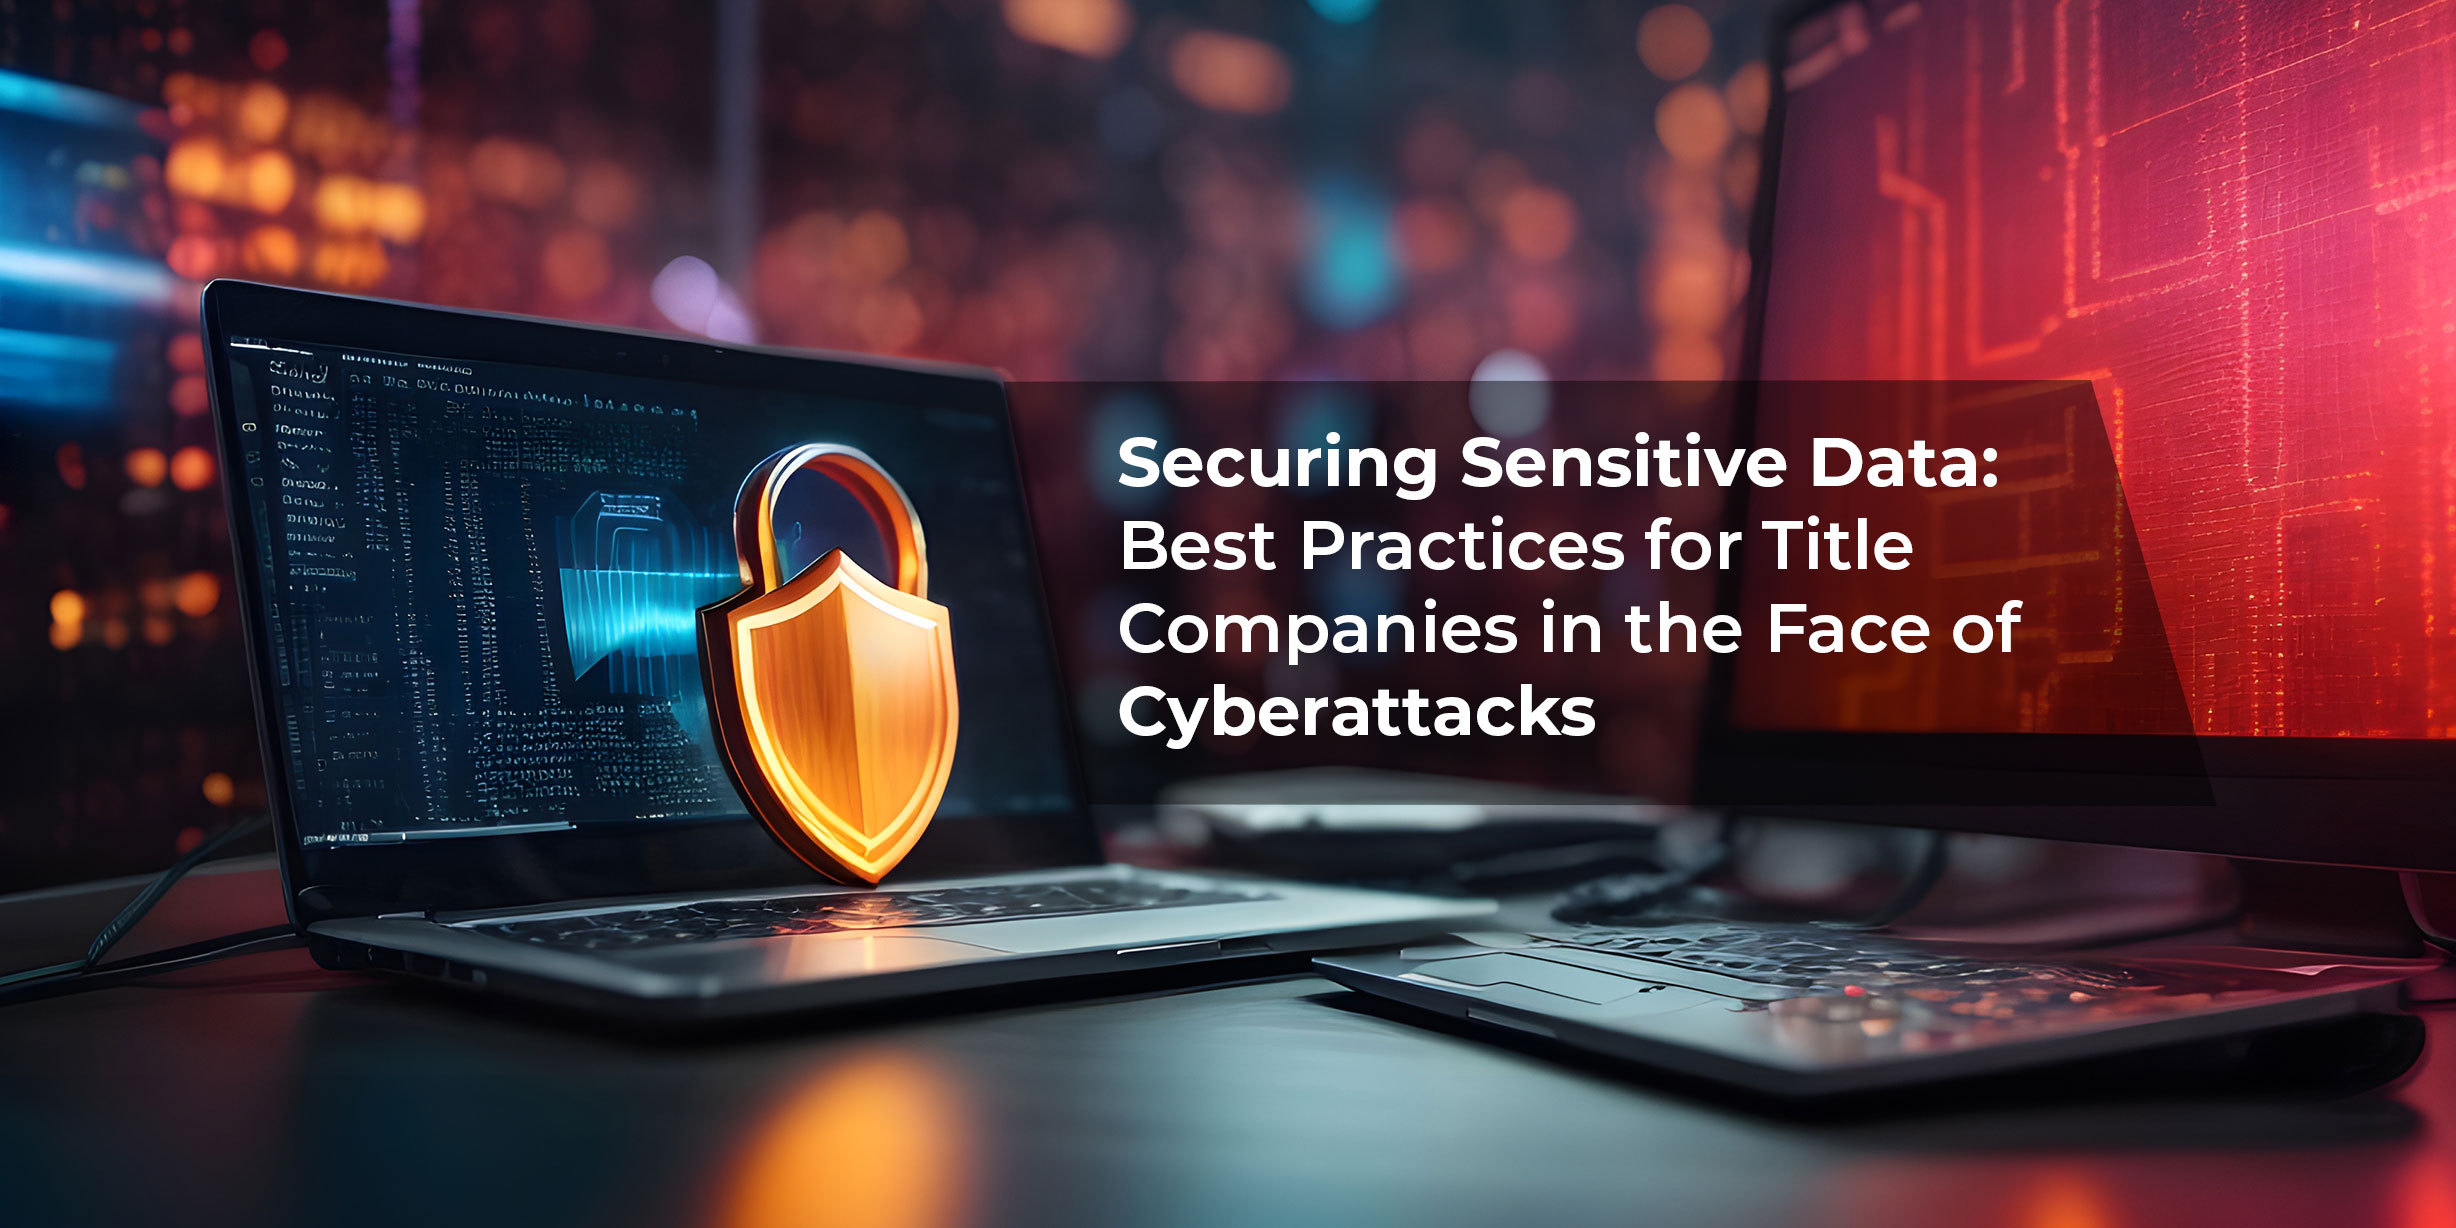 Securing Sensitive Data: Best Practices for Title Companies in the Face of Cyberattacks